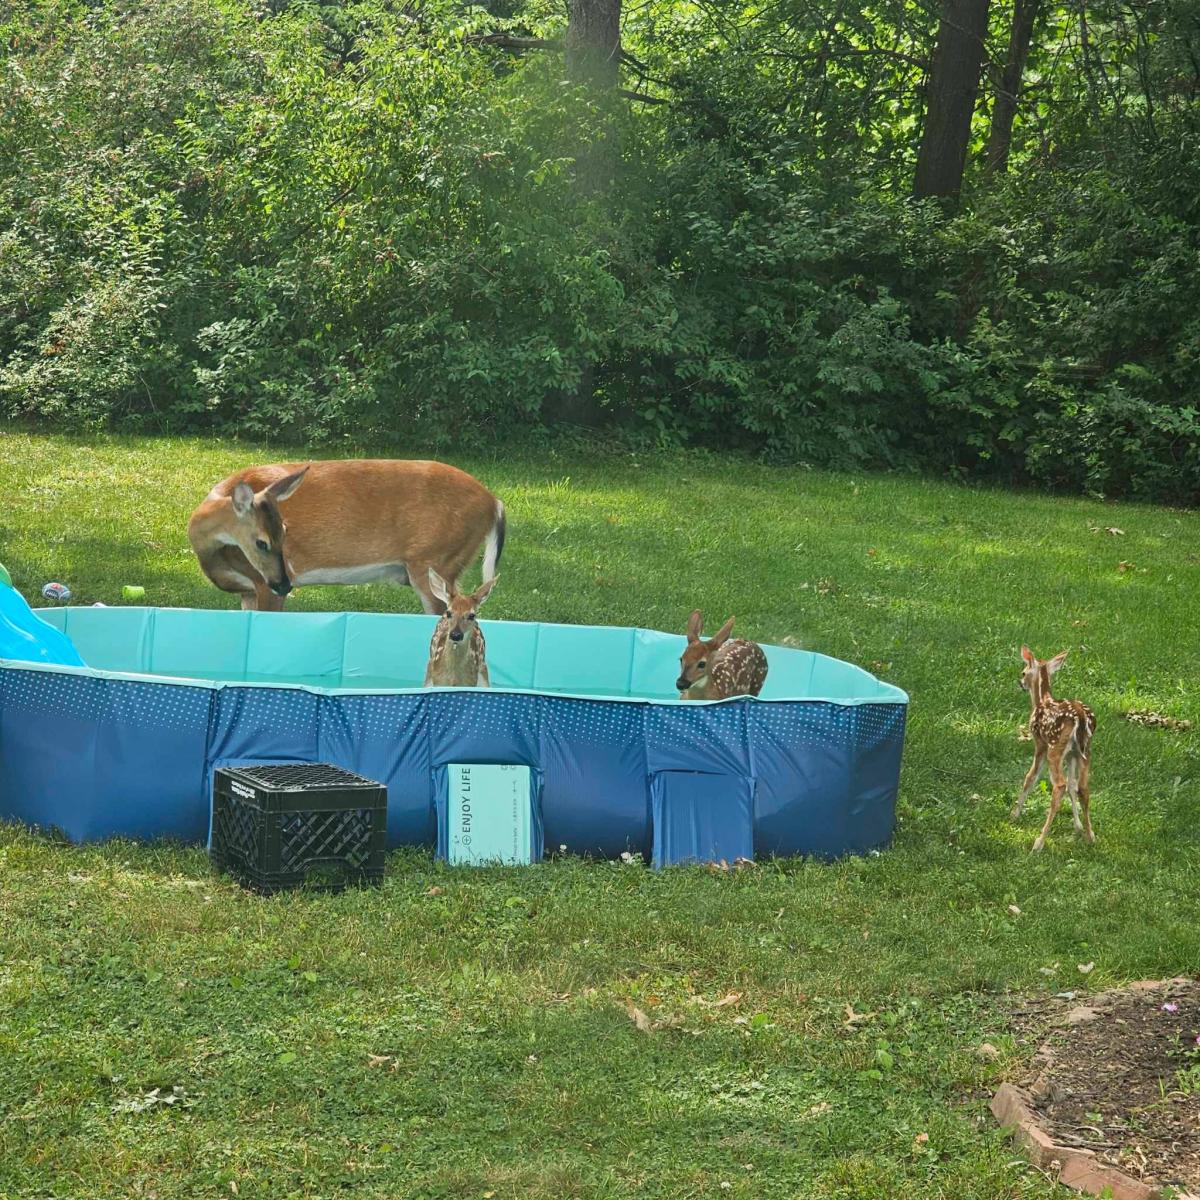 A woman from Stow’s photos of a fawn playing in the pool go viral